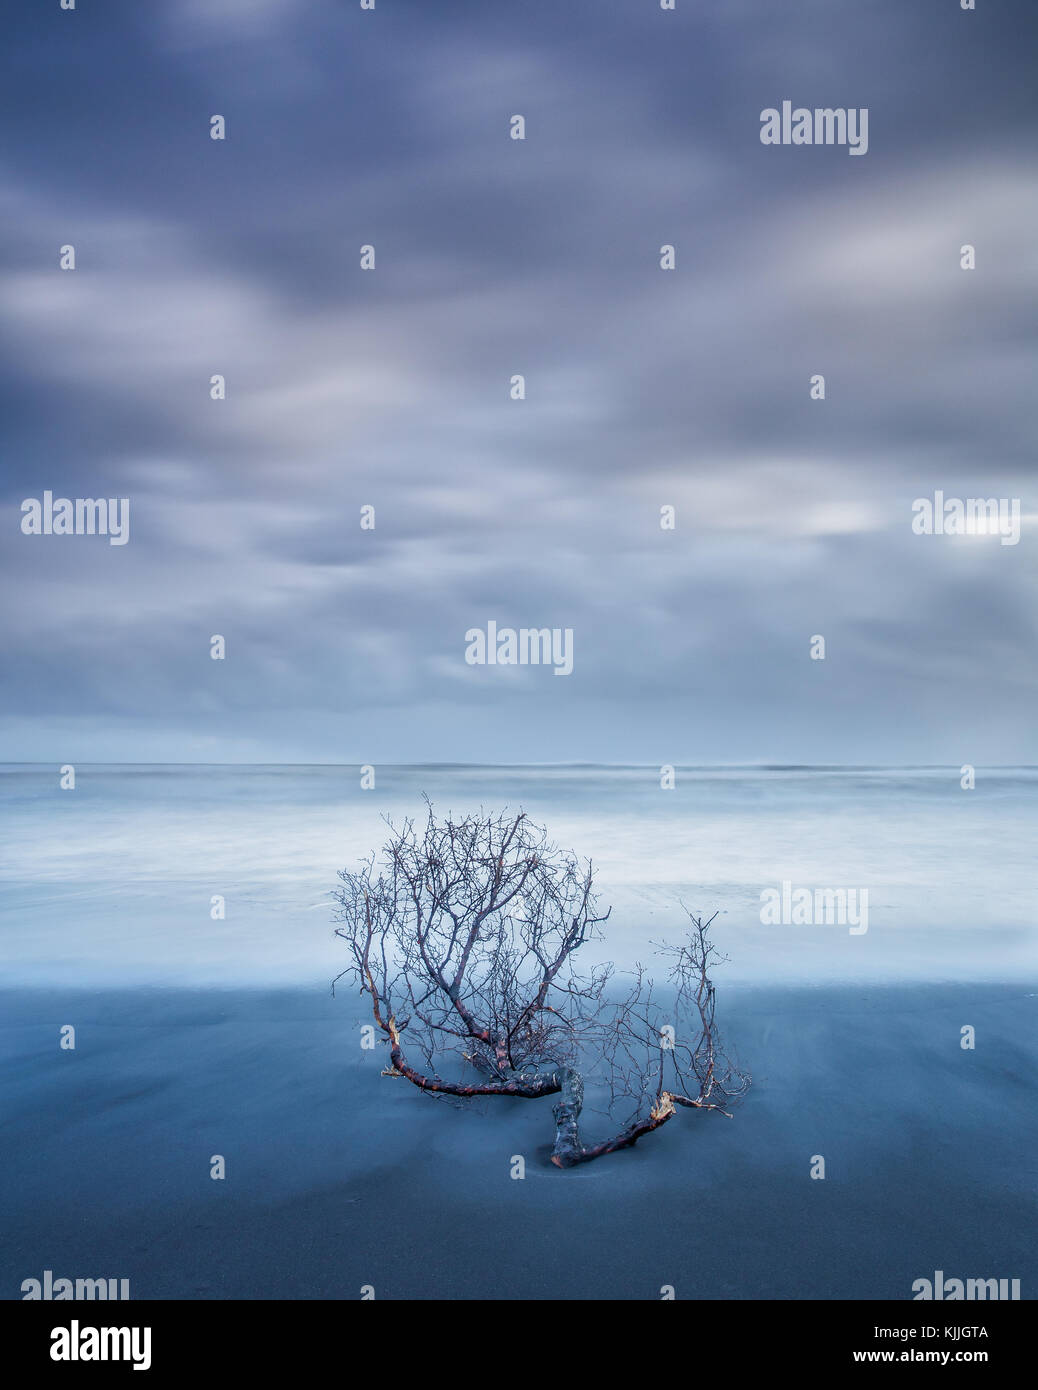 Long exposures with the branch that had been swept ashore during the morning storm Stock Photo